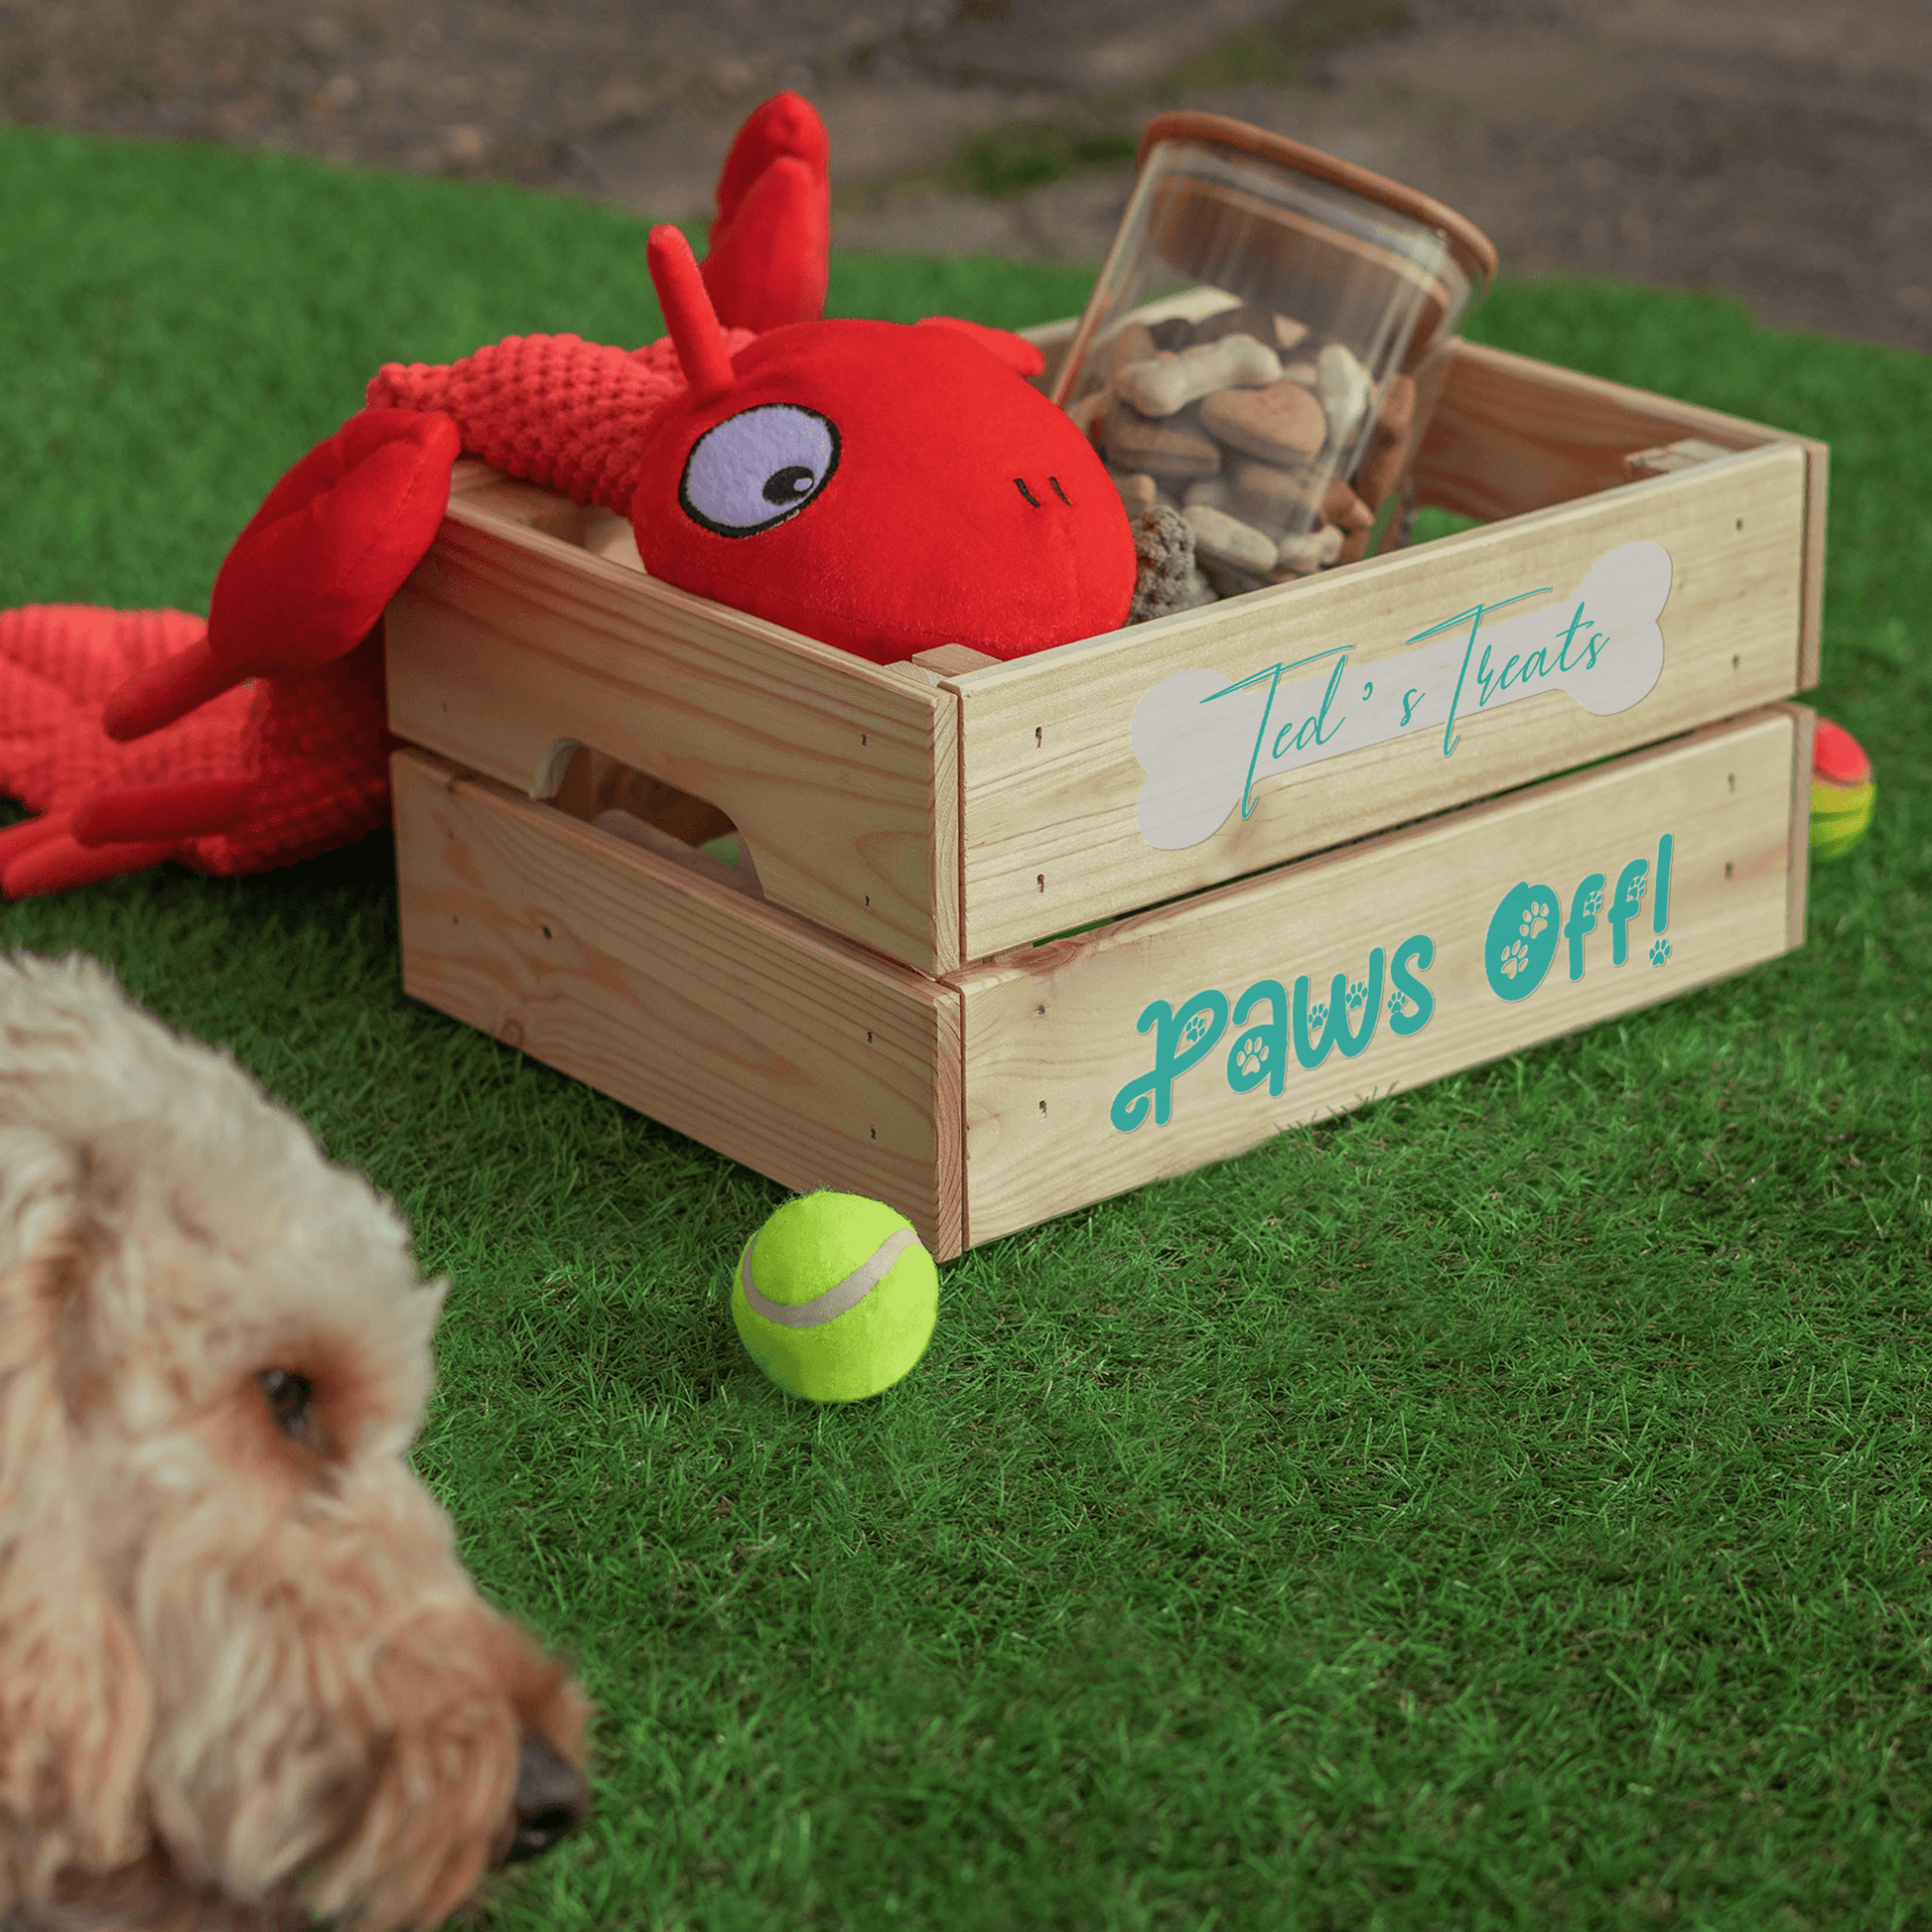 Personalised Printed Dog Crate - So Bespoke Gifts